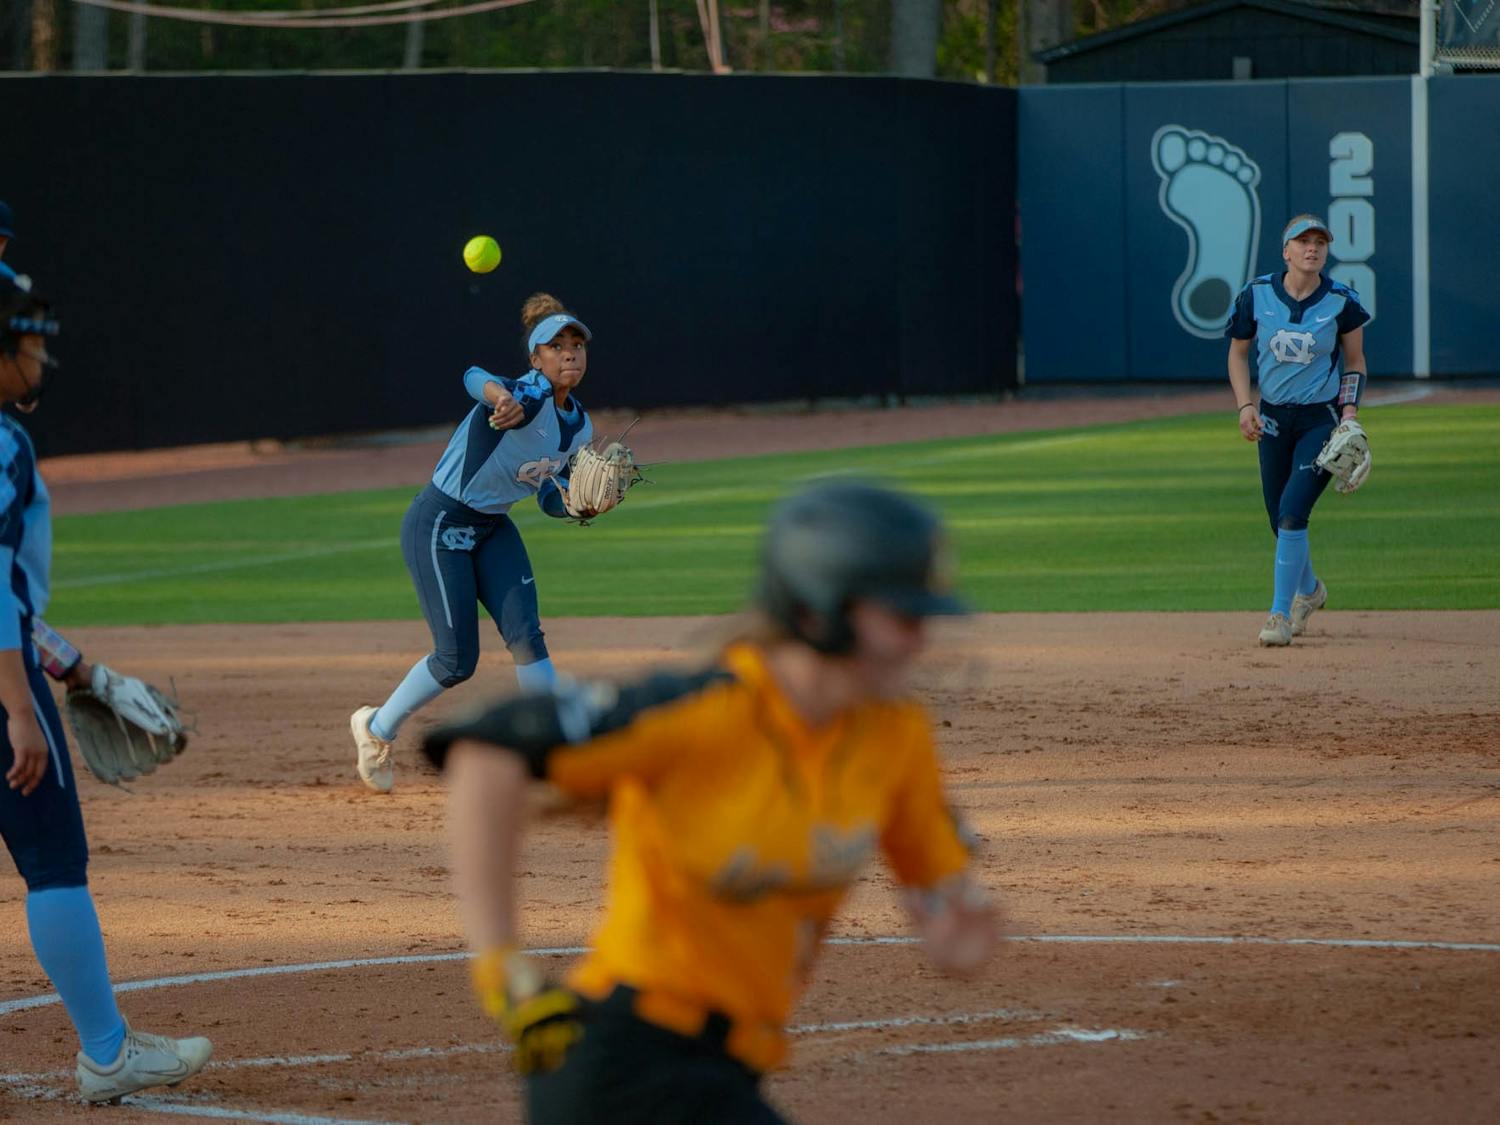 Junior, Destiny Middlton, (47) fields the ball at third base during the Tar Heels 8-4 victory at Anderson Softball Stadium on Mar. 20, 2022.